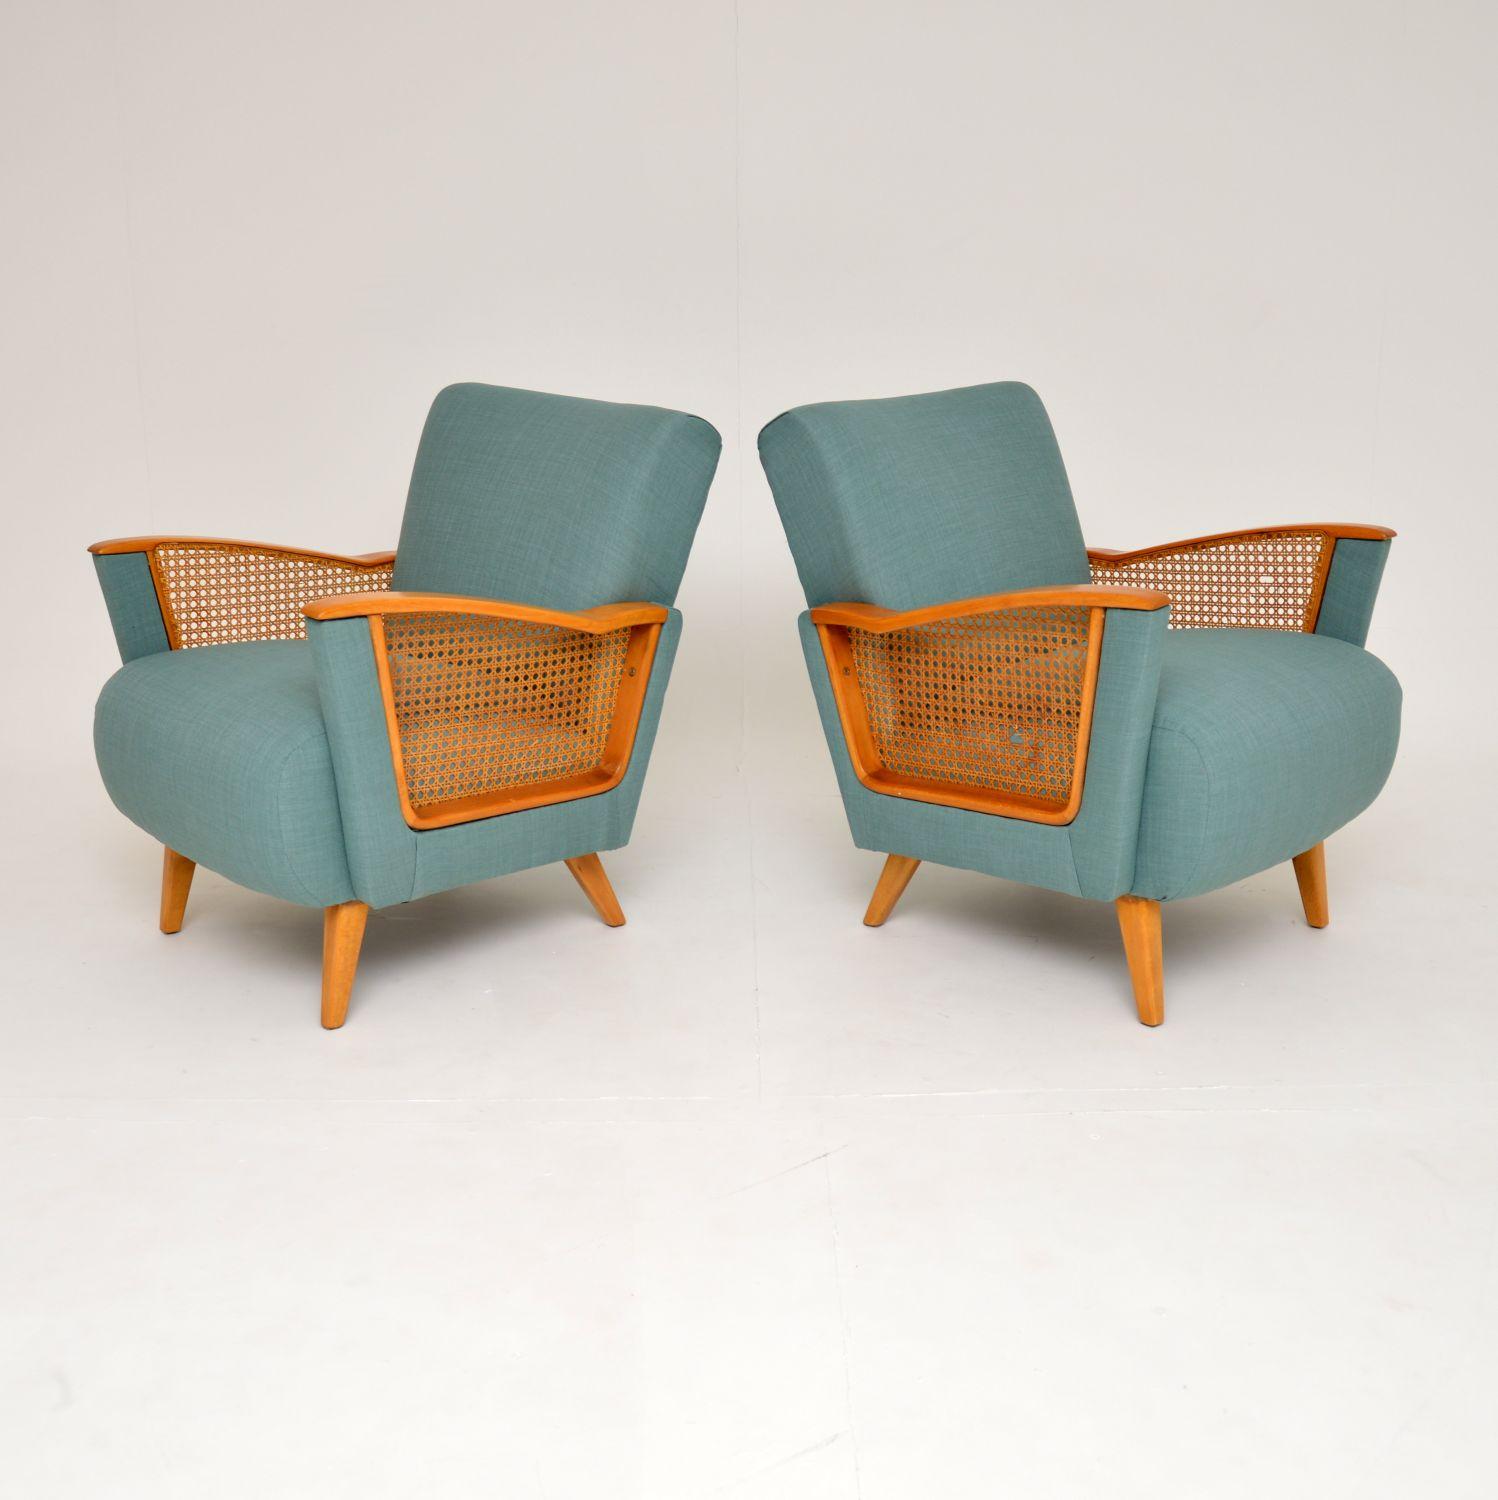 A stylish and extremely comfortable pair of vintage Swedish armchairs. These were recently imported from Sweden, they date from the 1960’s.

They have lovely light beech wood wood frames with cane sides, and sit on elegant yet sturdy tapered